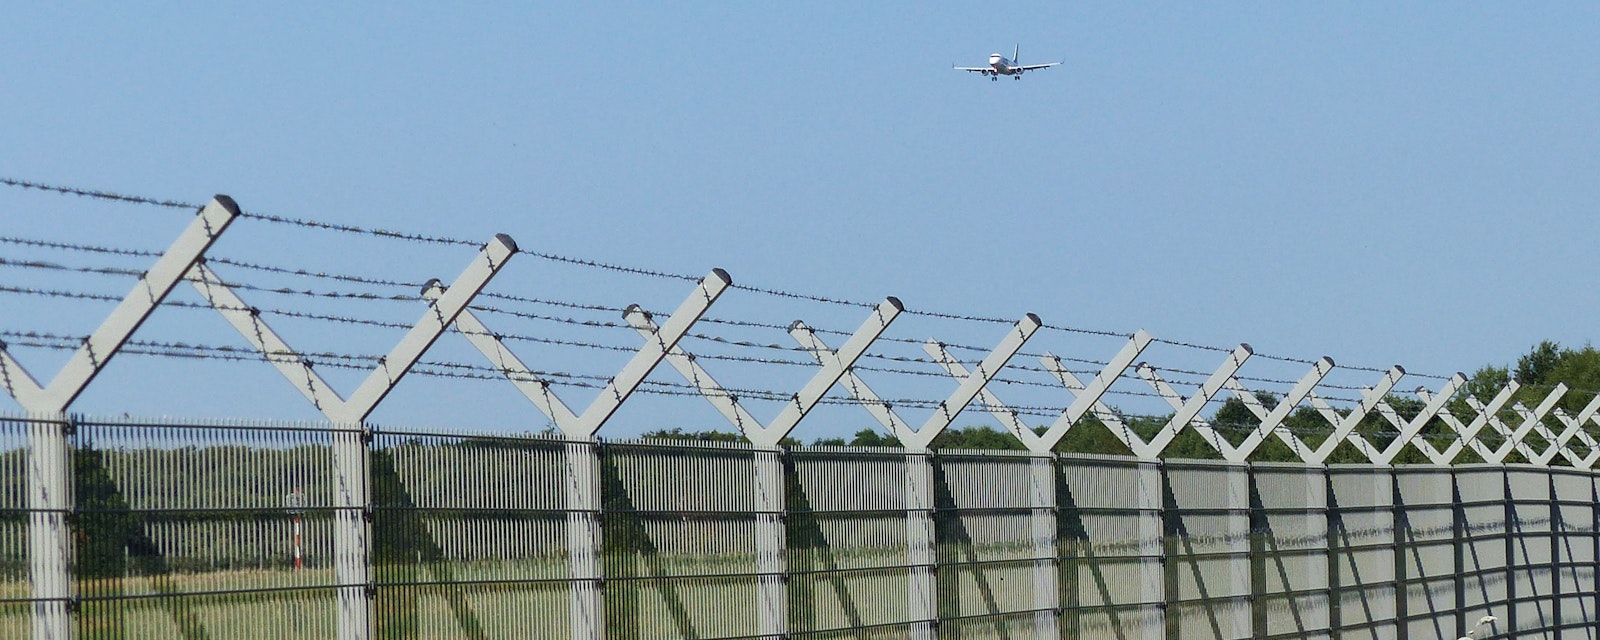 Security fence of an airport